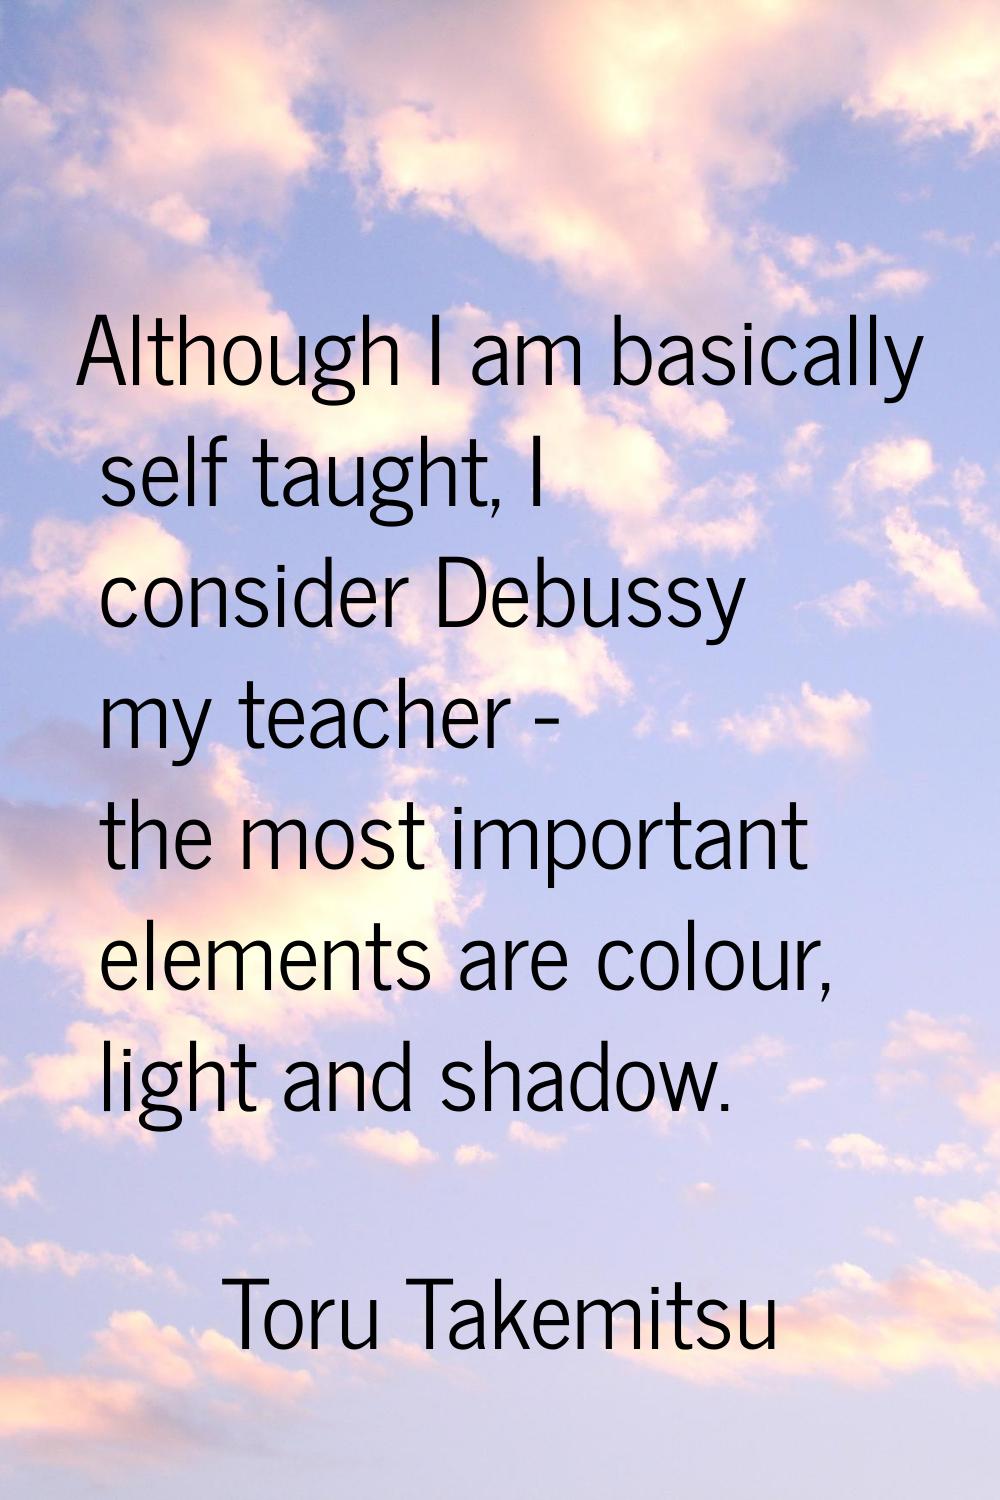 Although I am basically self taught, I consider Debussy my teacher - the most important elements ar